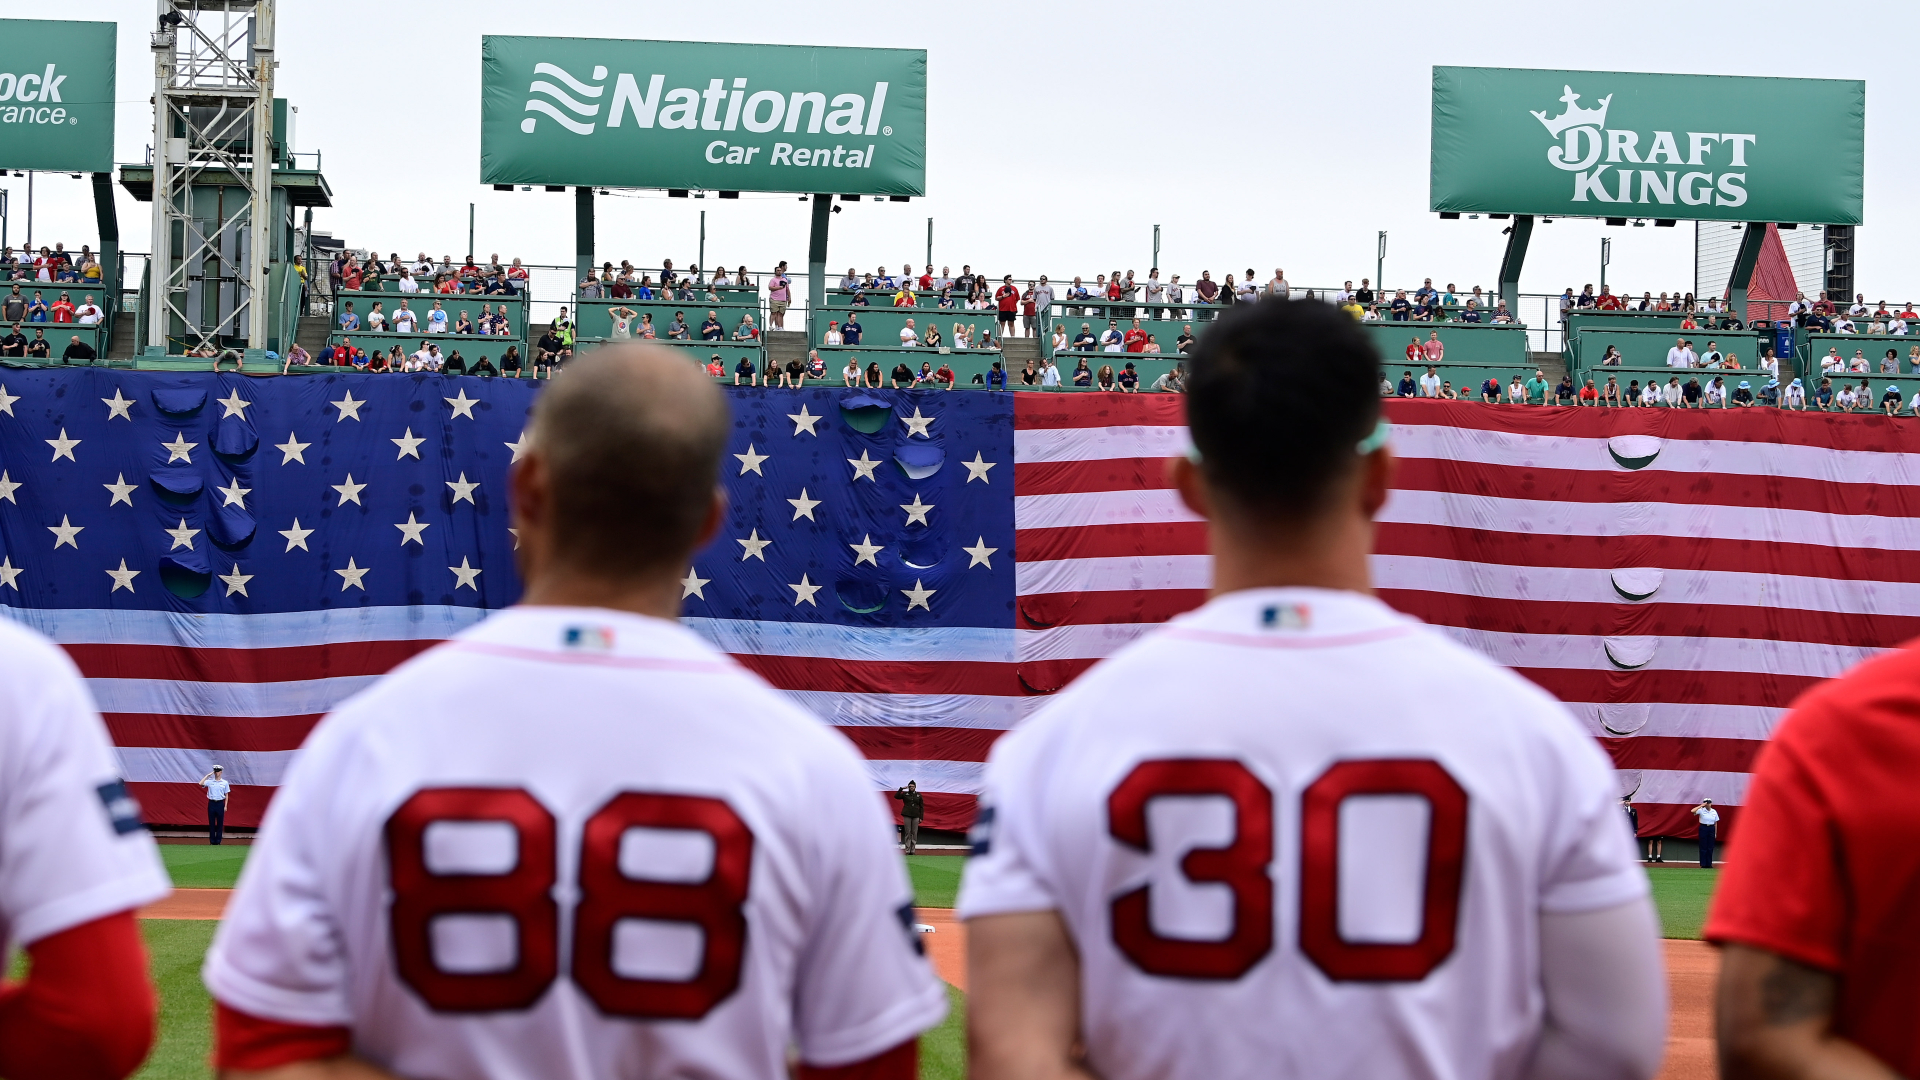 Why NESN called Thursday's Red Sox game from the Green Monster